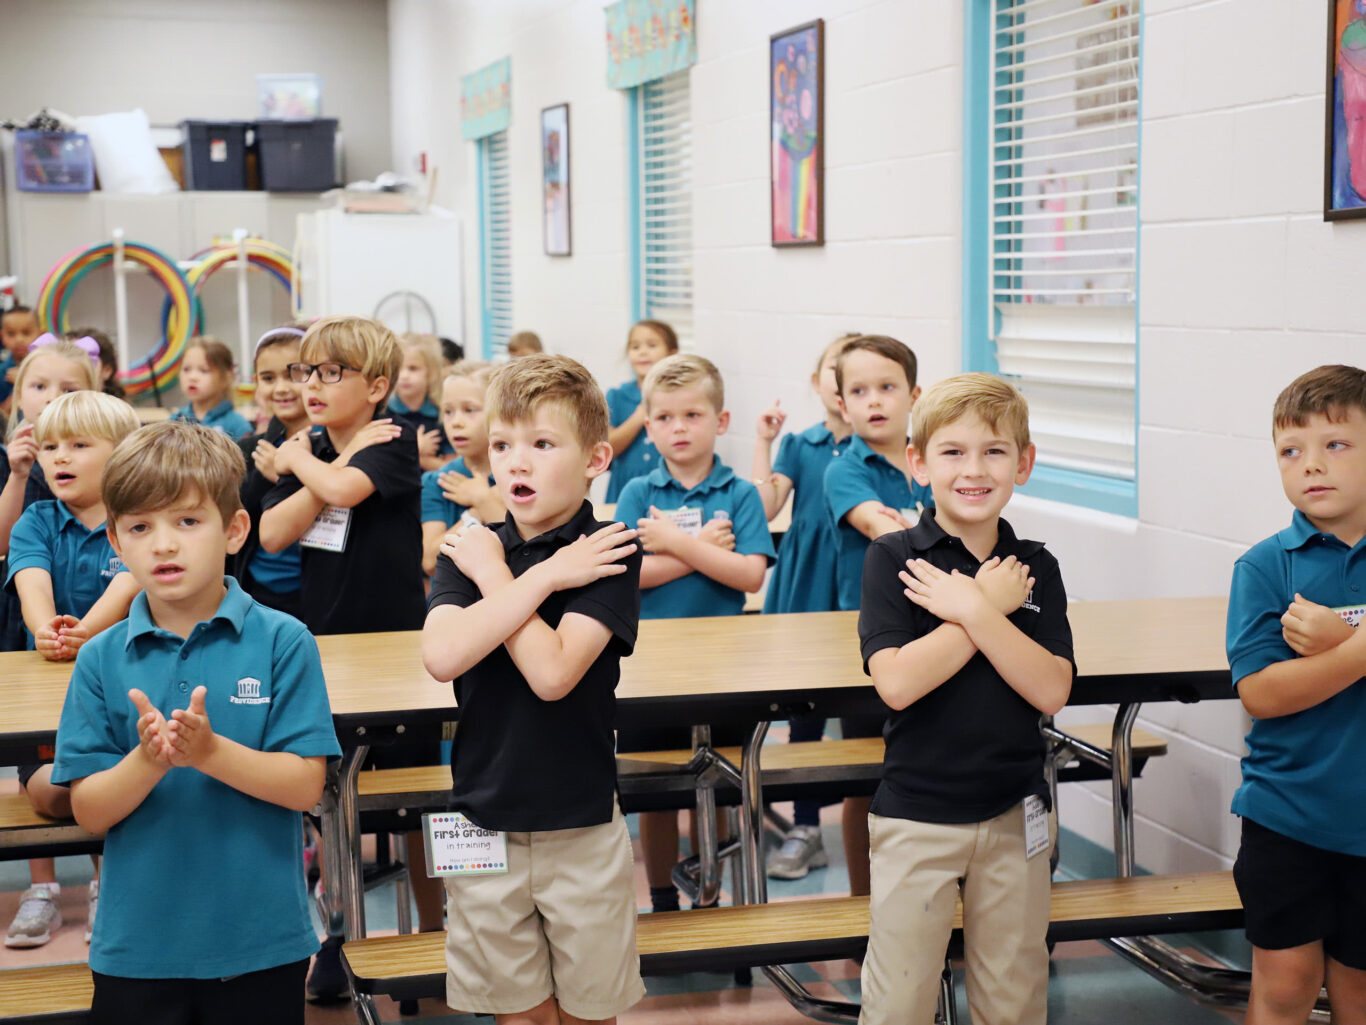 A group of lower school children standing in a classroom and clapping.